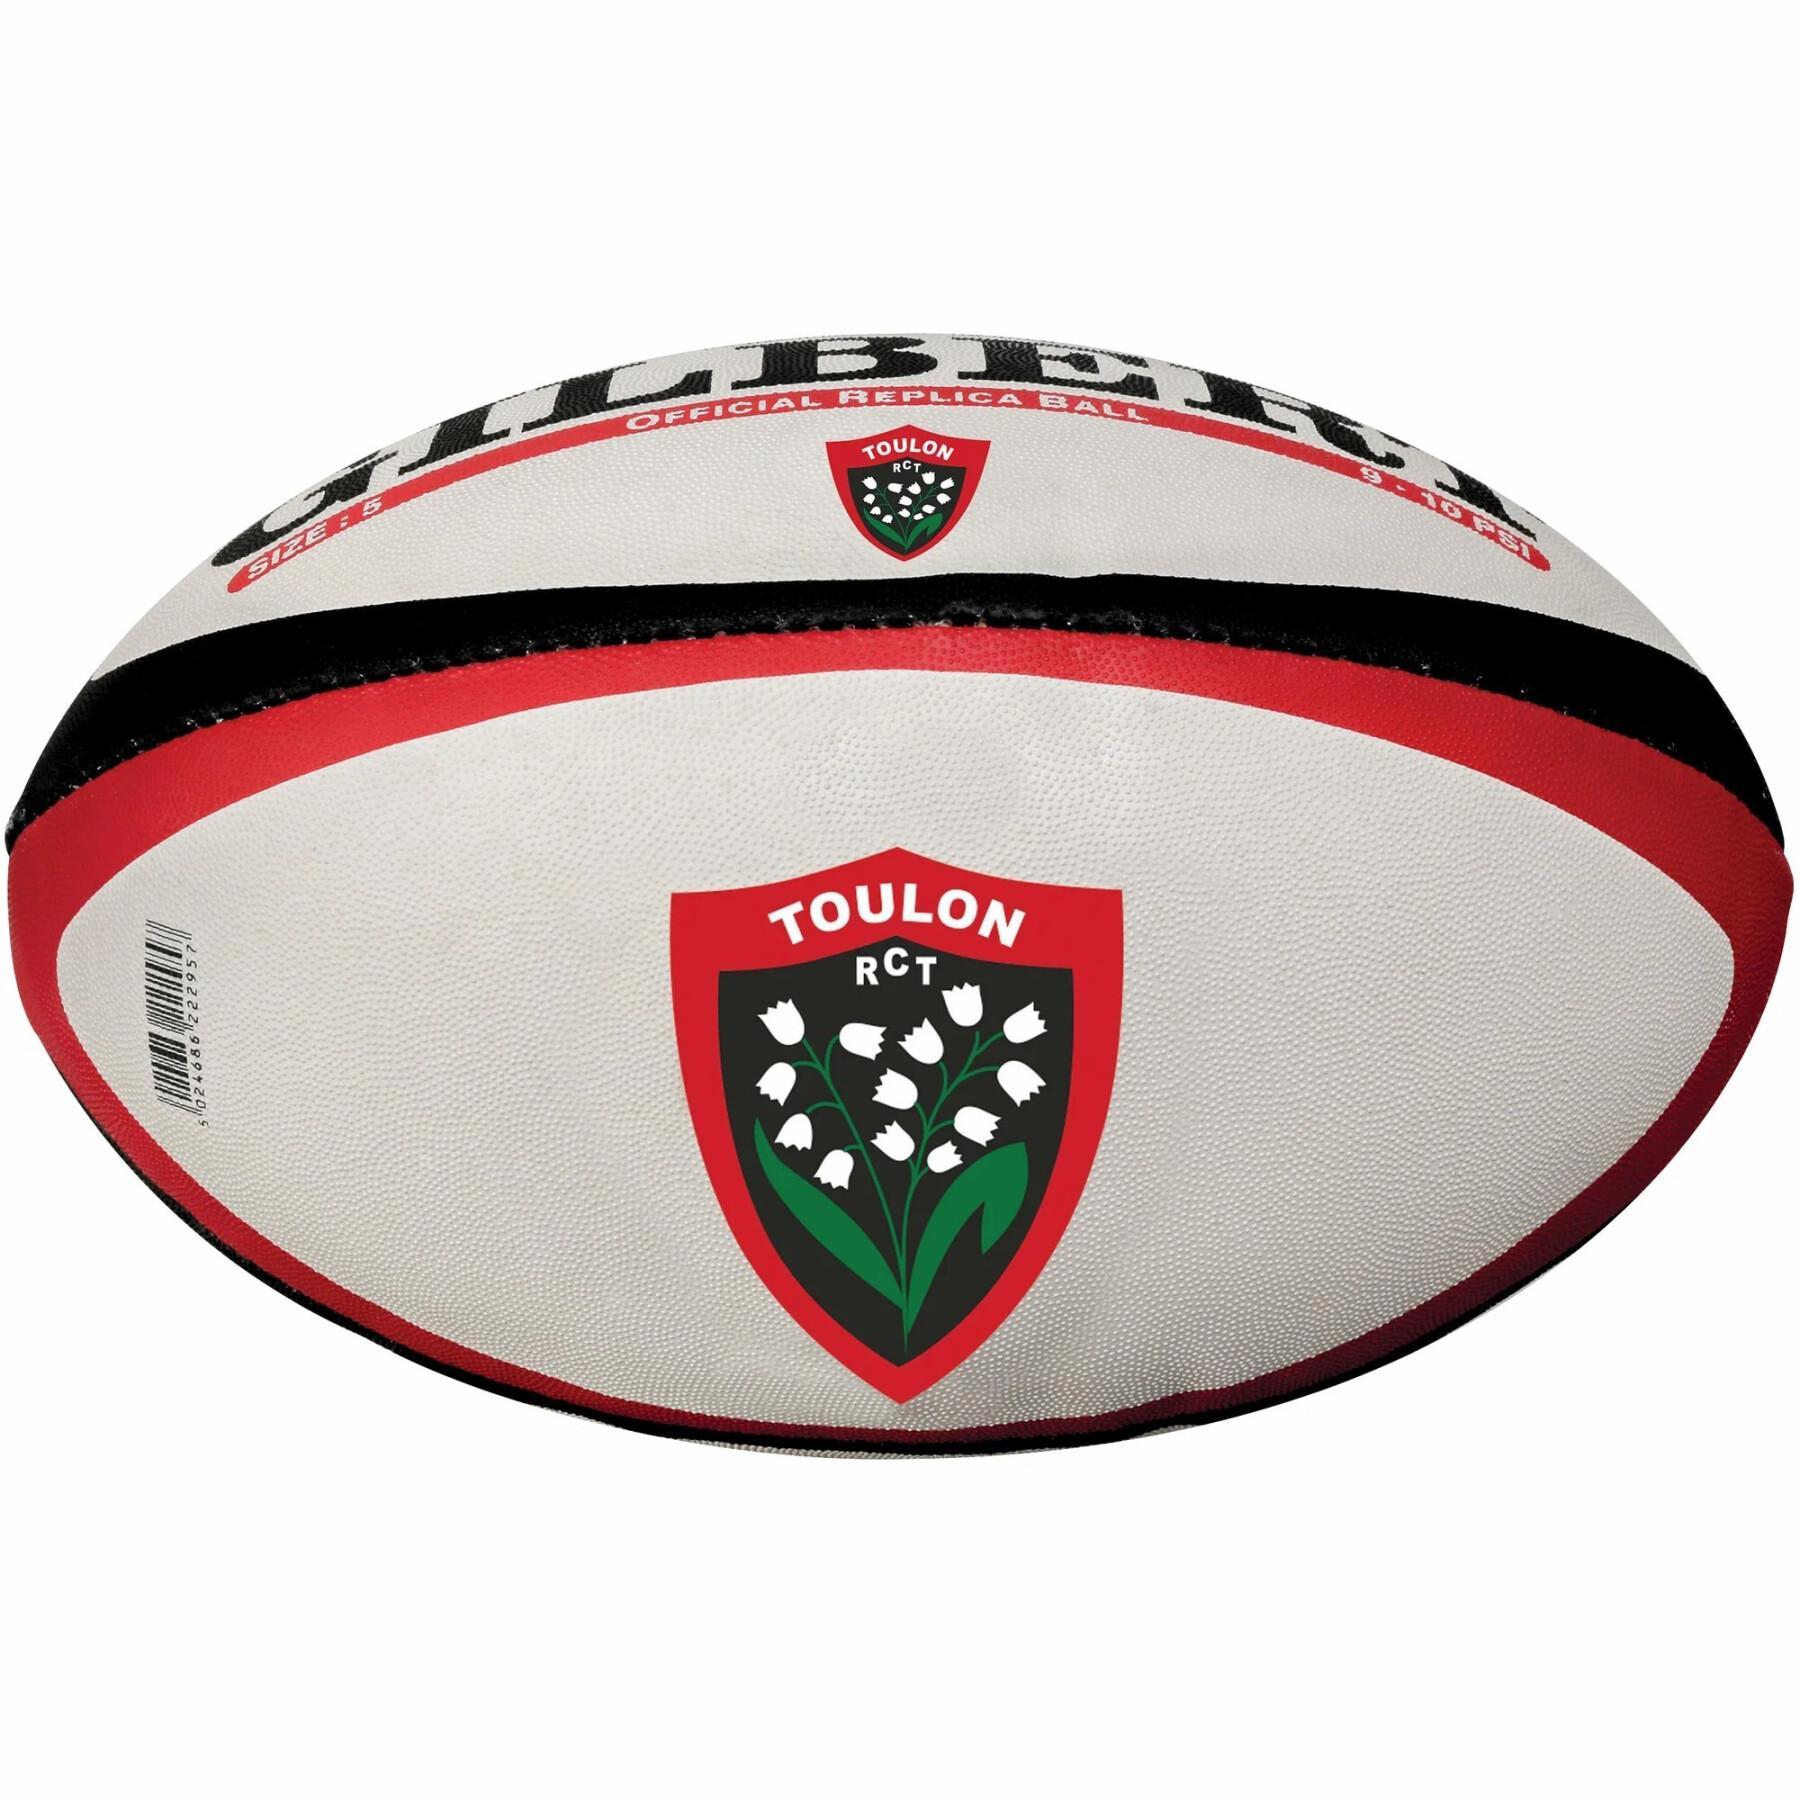 Rugby ball Toulon